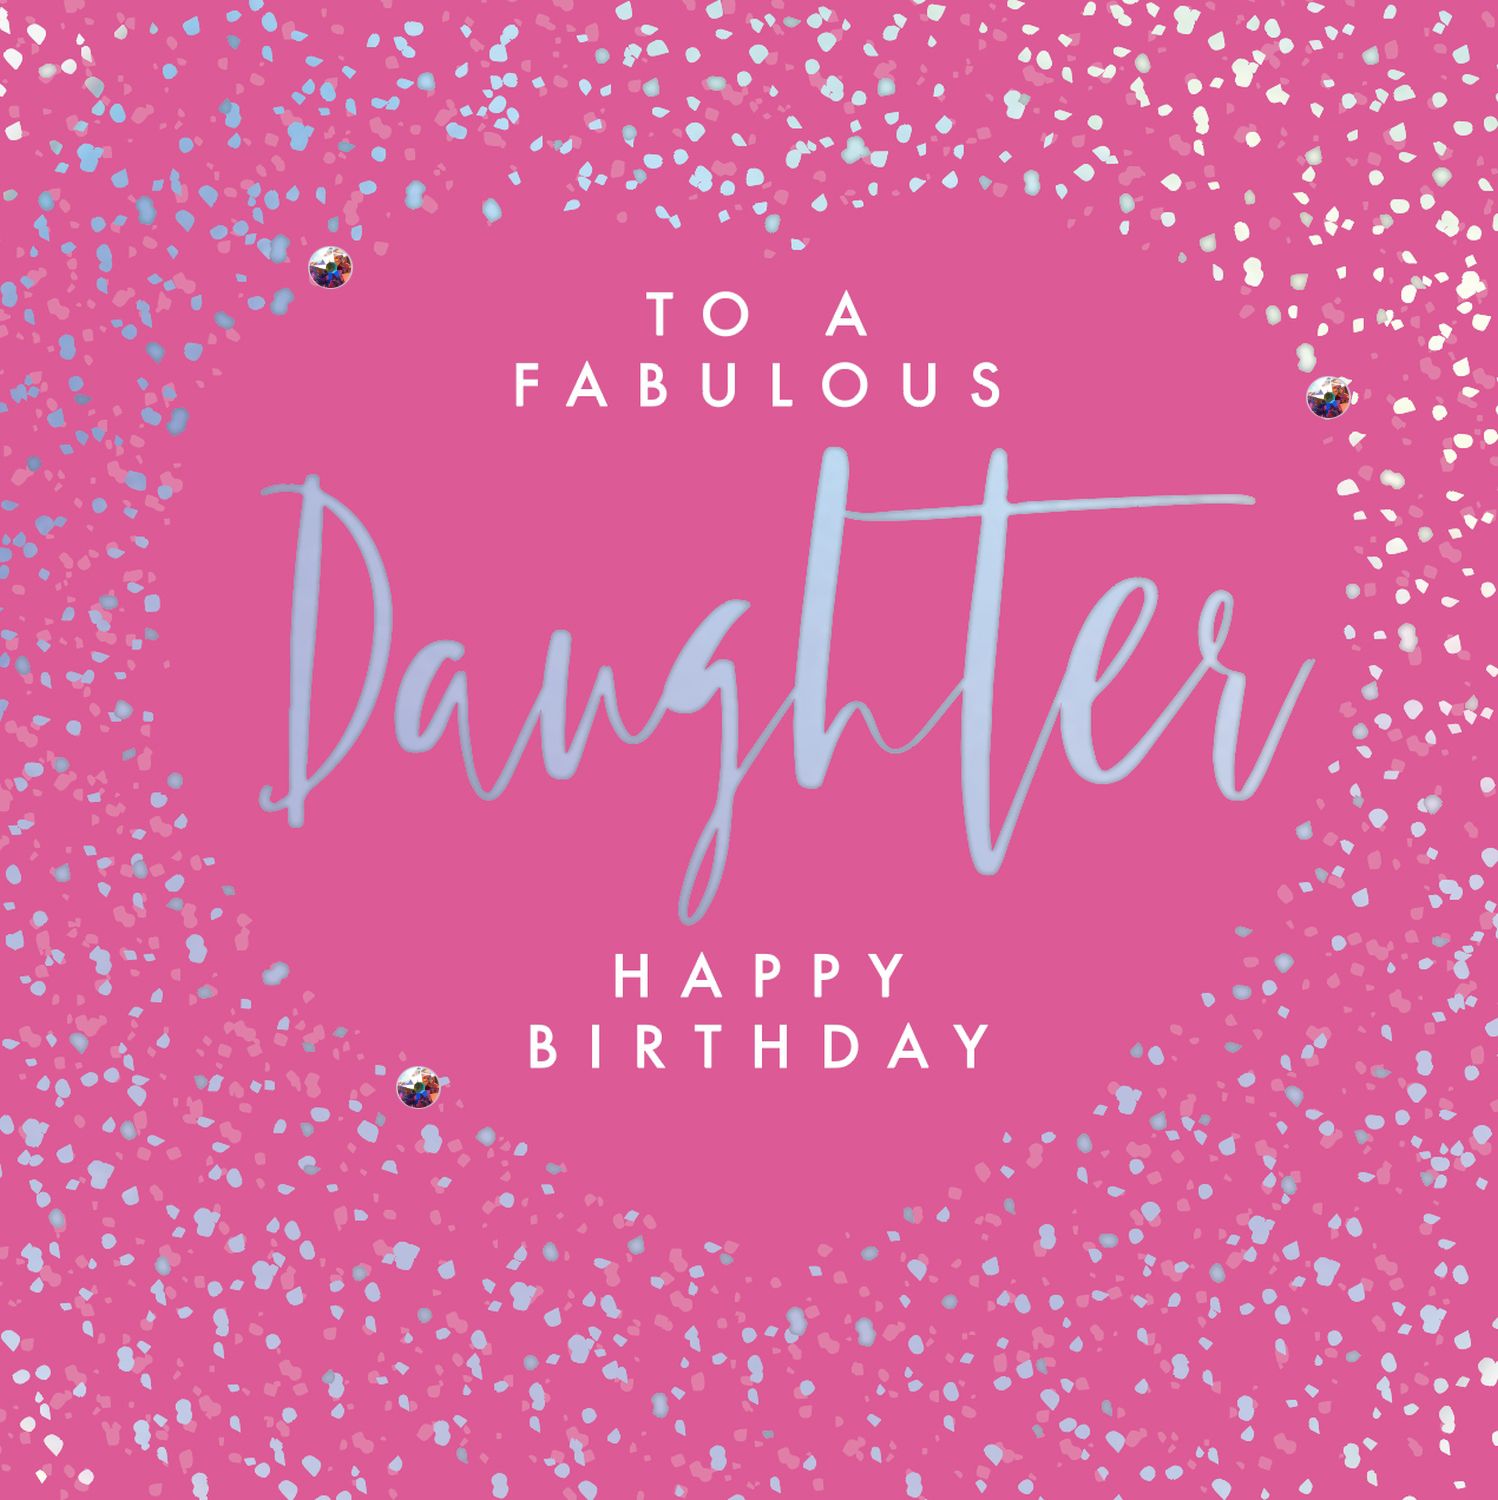 printable-birthday-cards-for-daughter